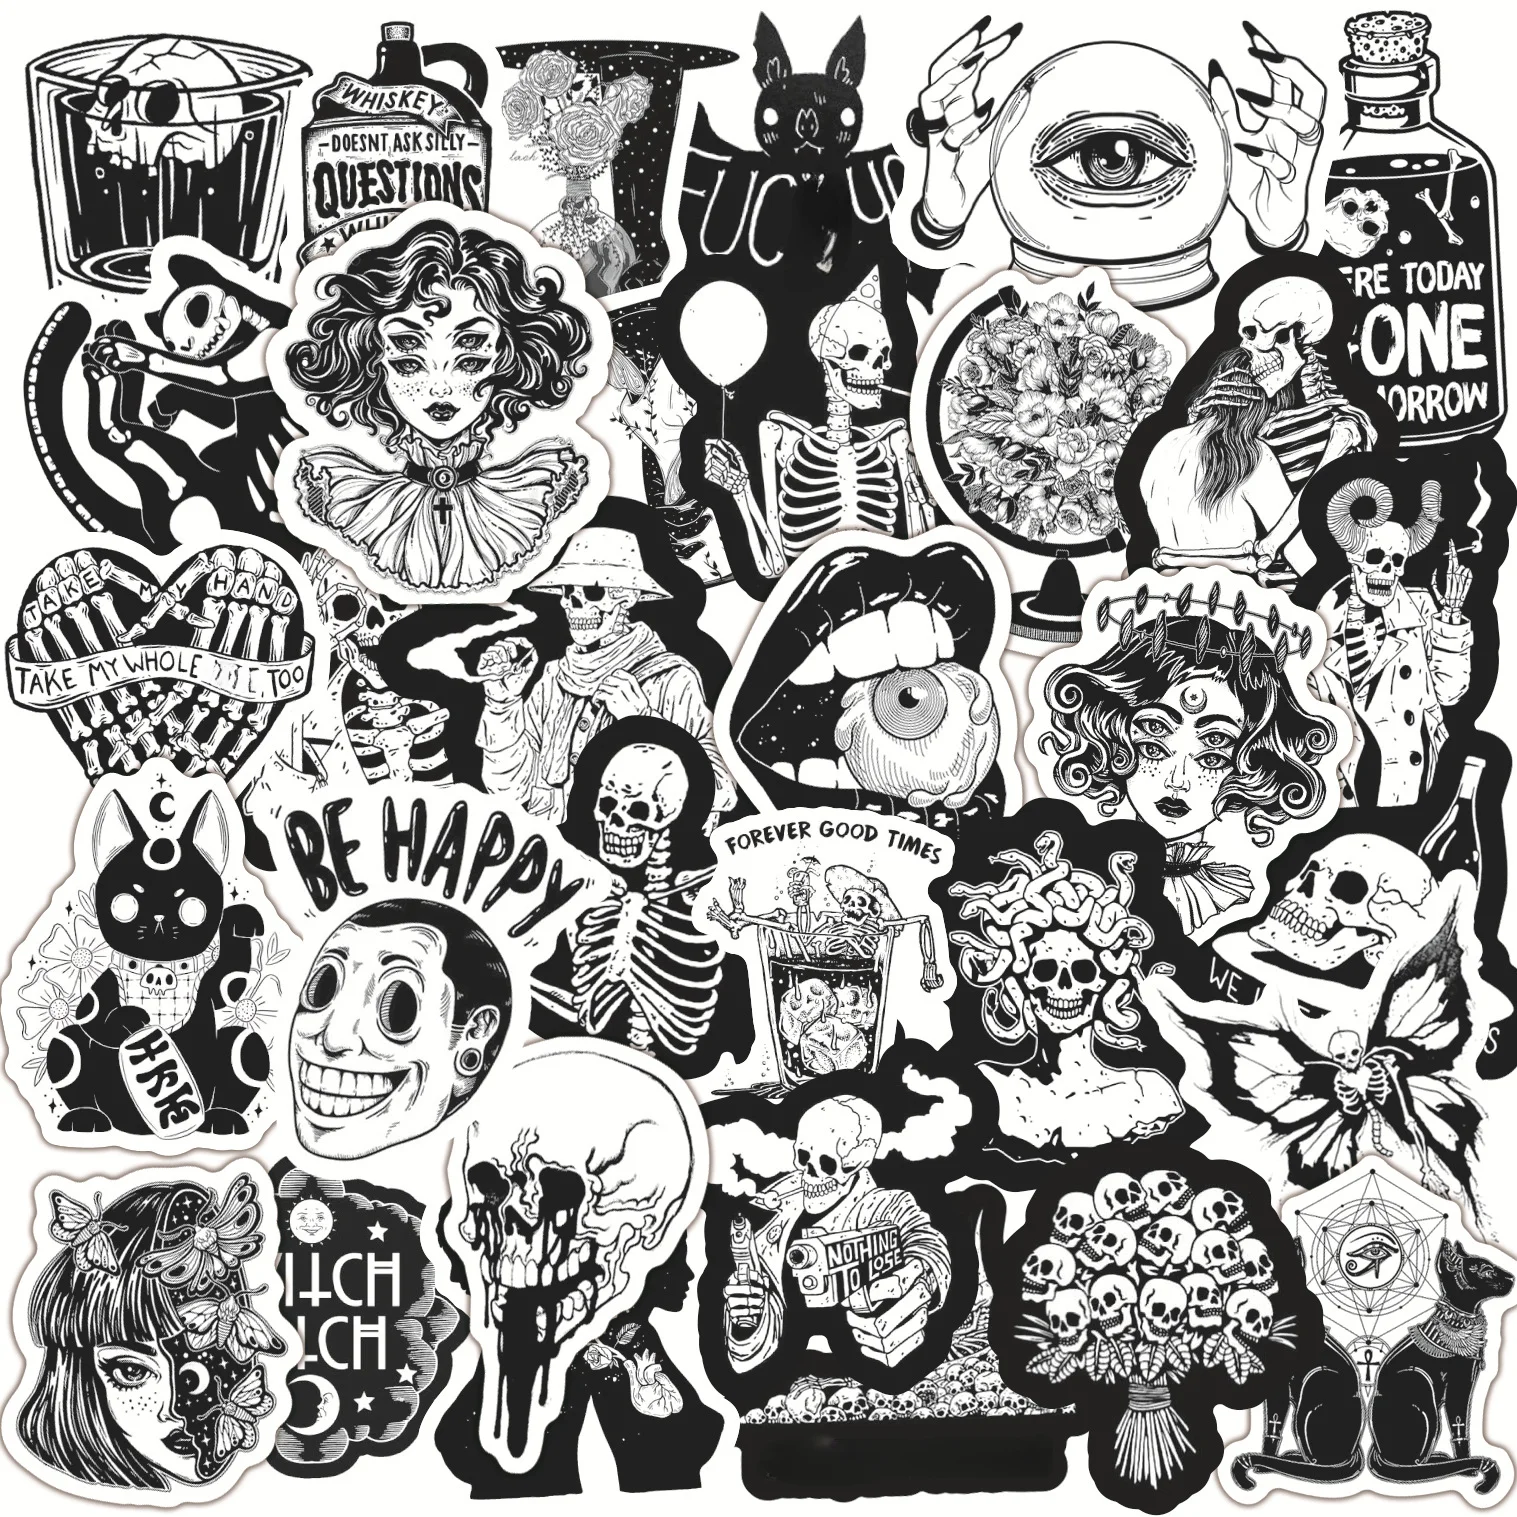 100PCS Mixed Black White Gothic Stickers Graffiti Motorcycle Skateboard Travel Phone Case Decal Toys Sticker Waterproof 7ipupas low wholesale price luminous sneakers white black blue graffiti 11 colors led lights glowing sneakers for boys girls kid